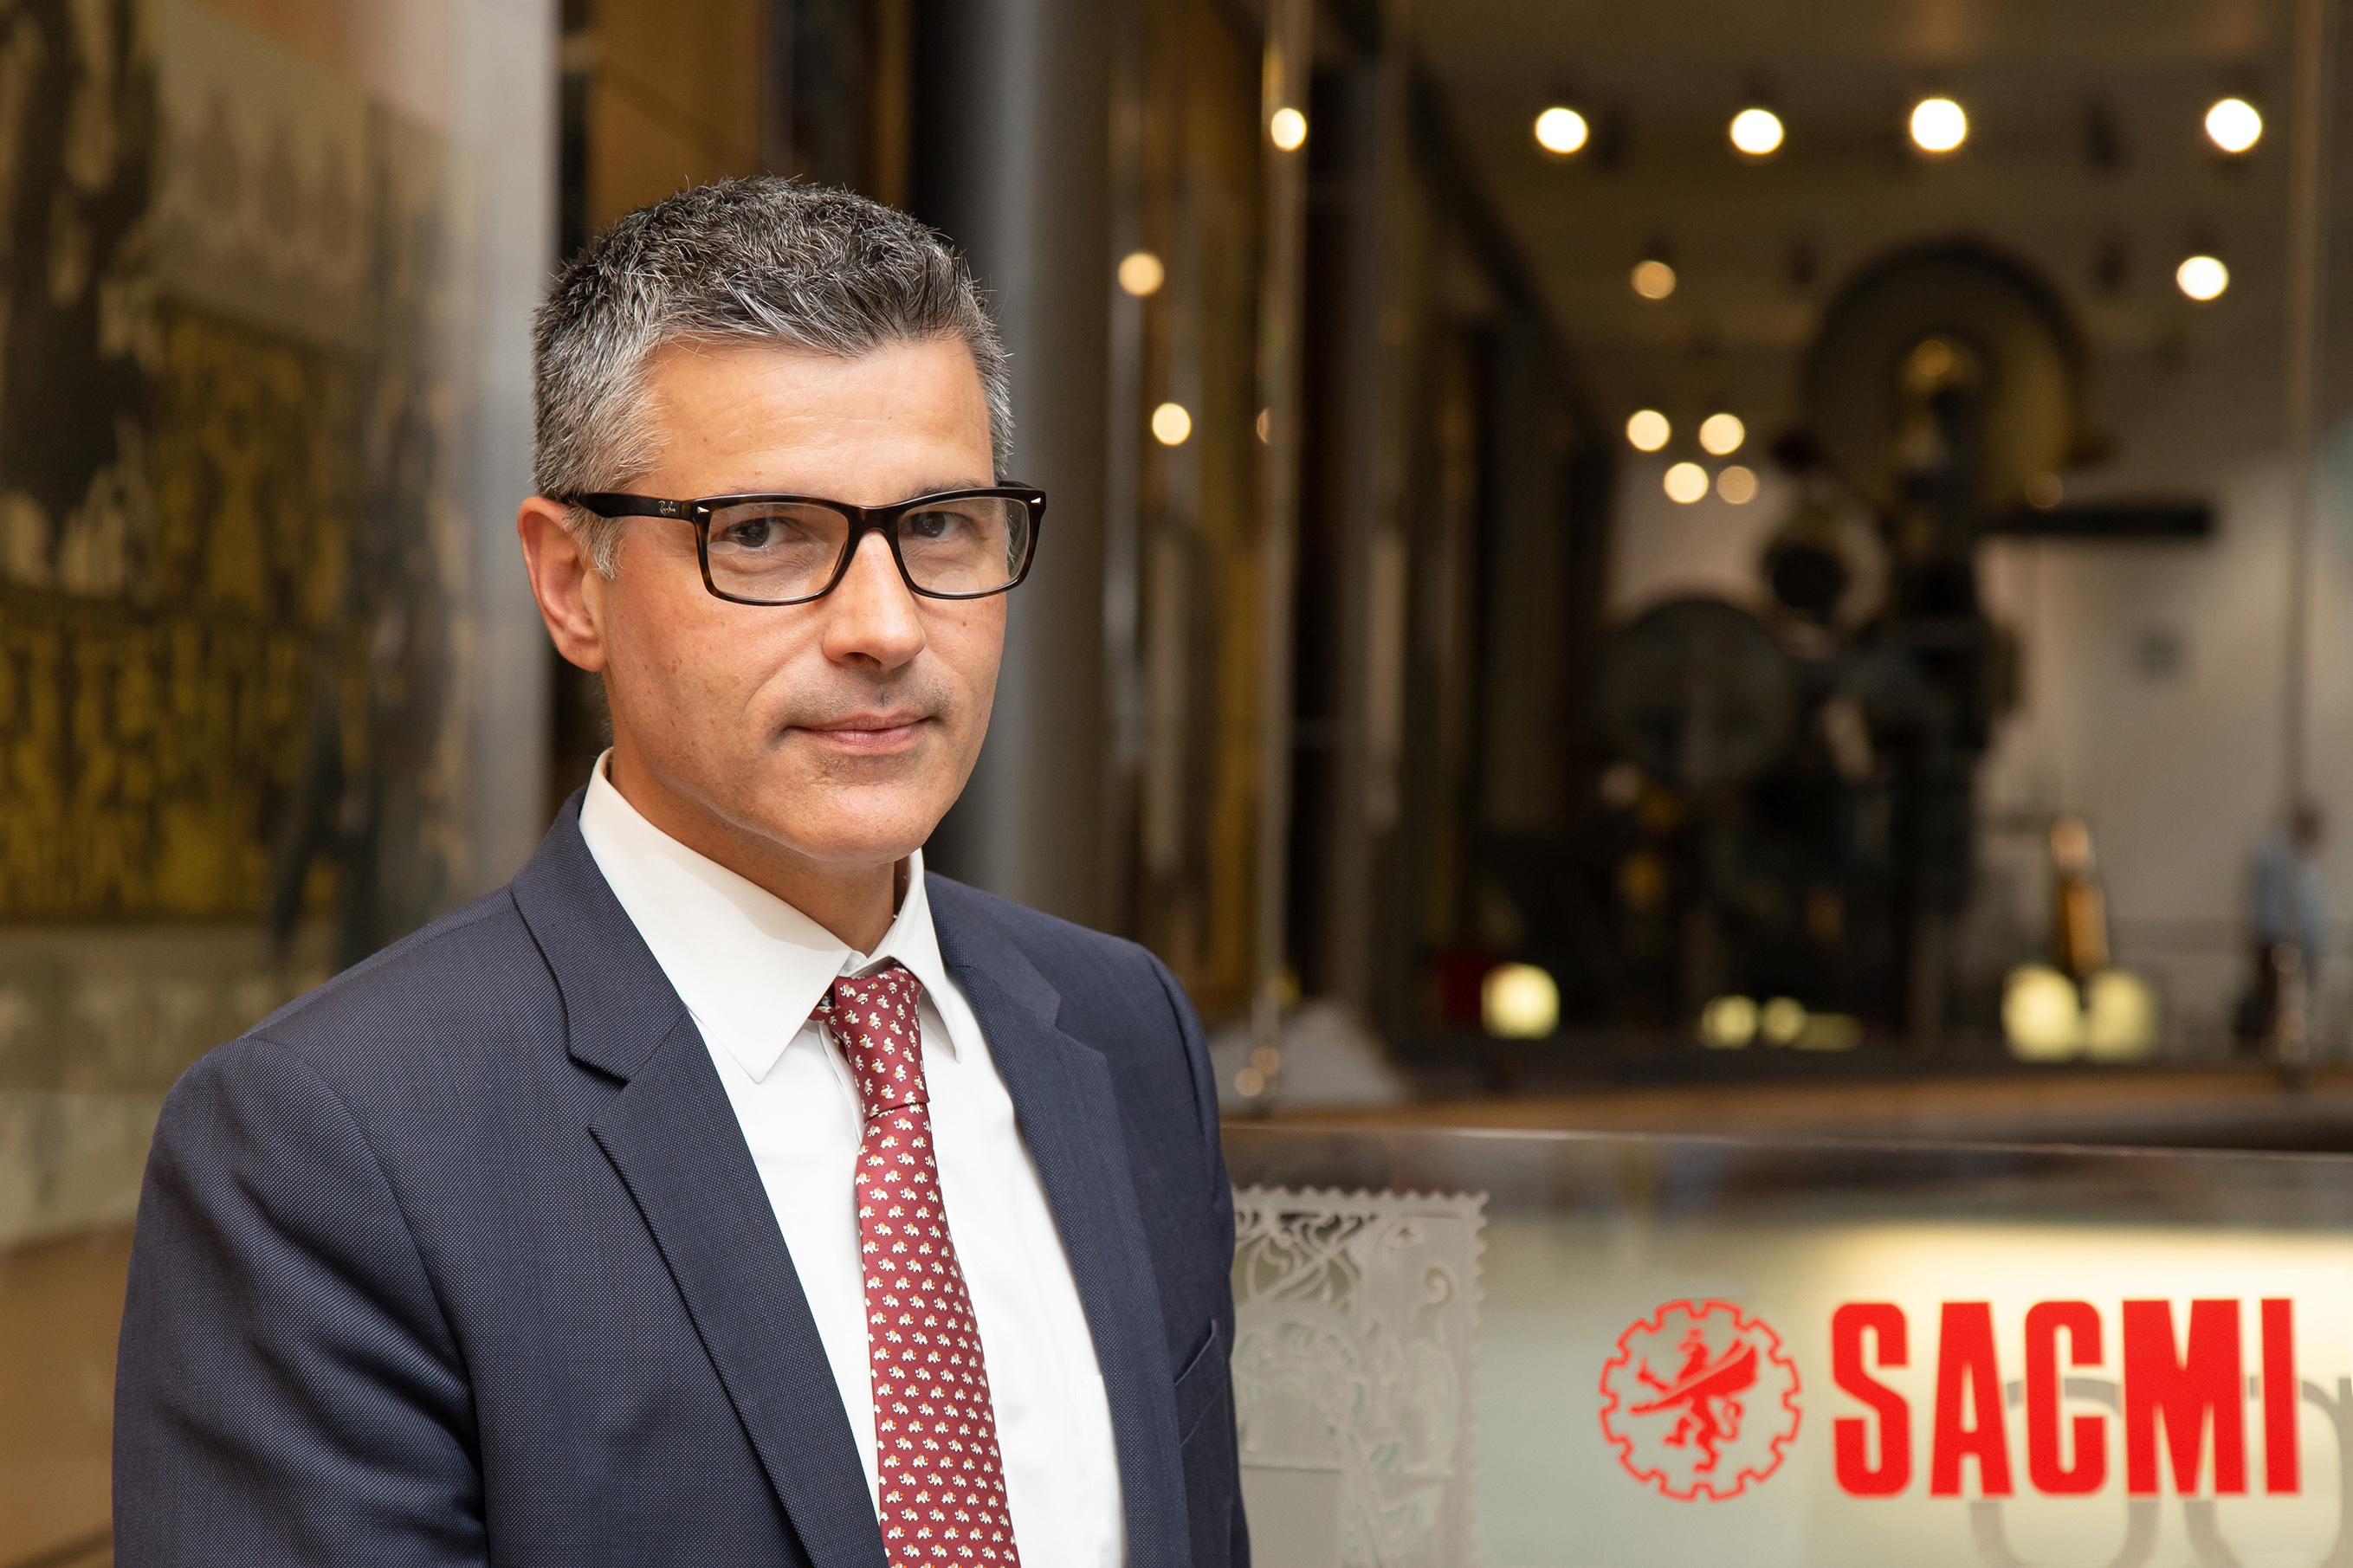 Giulio Mengoli is the new General Manager of the SACMI Group